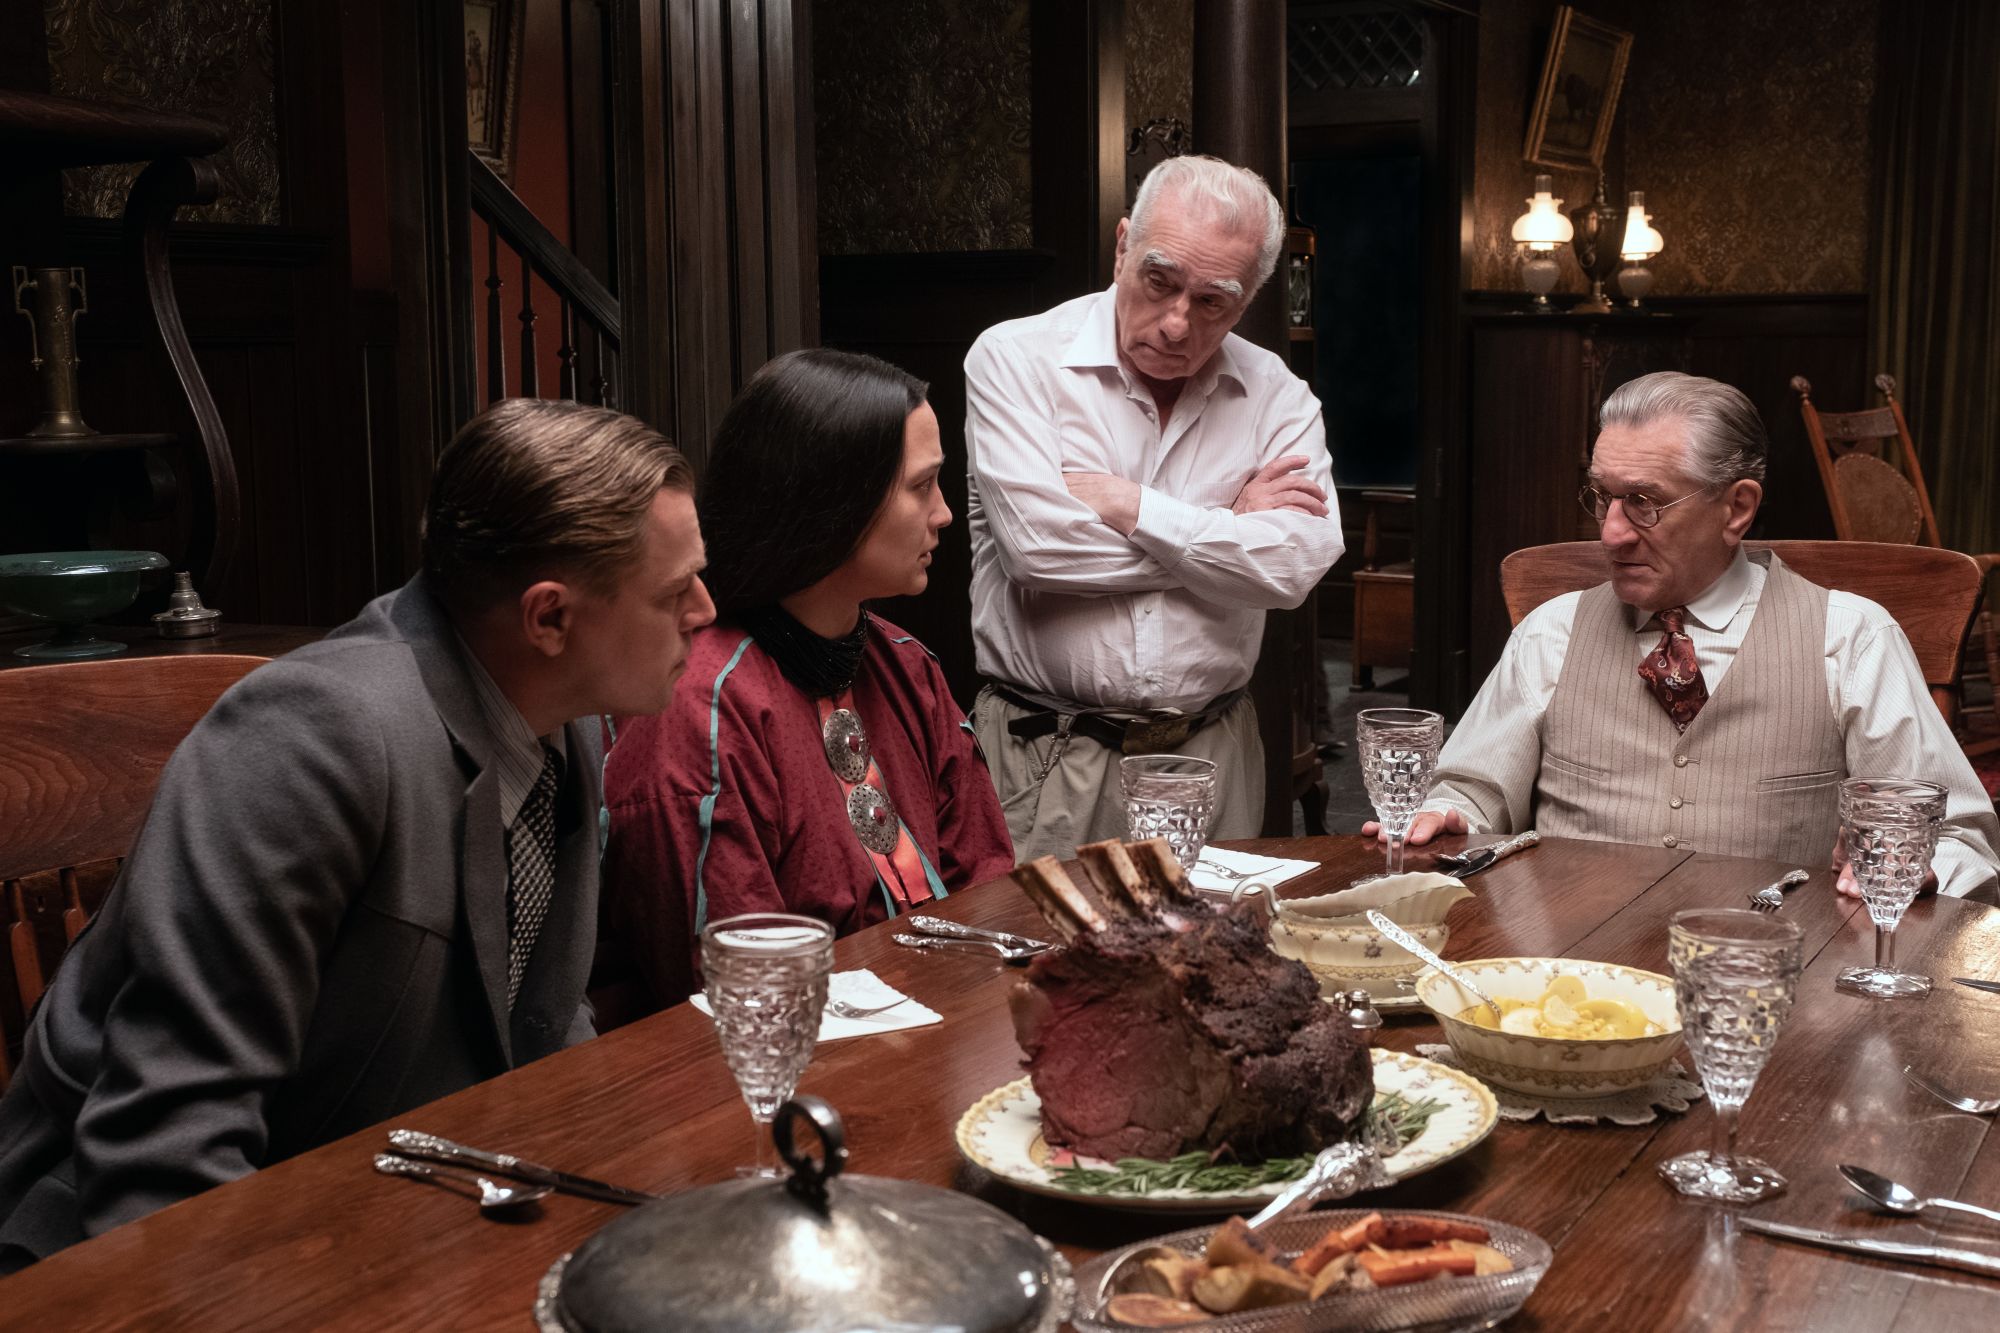 Left to right: Leonardo DiCaprio, Lily Glastone, Martin Scorsese and Robert De Niro discuss a scene during the making of "Killers of the Flower Moon."